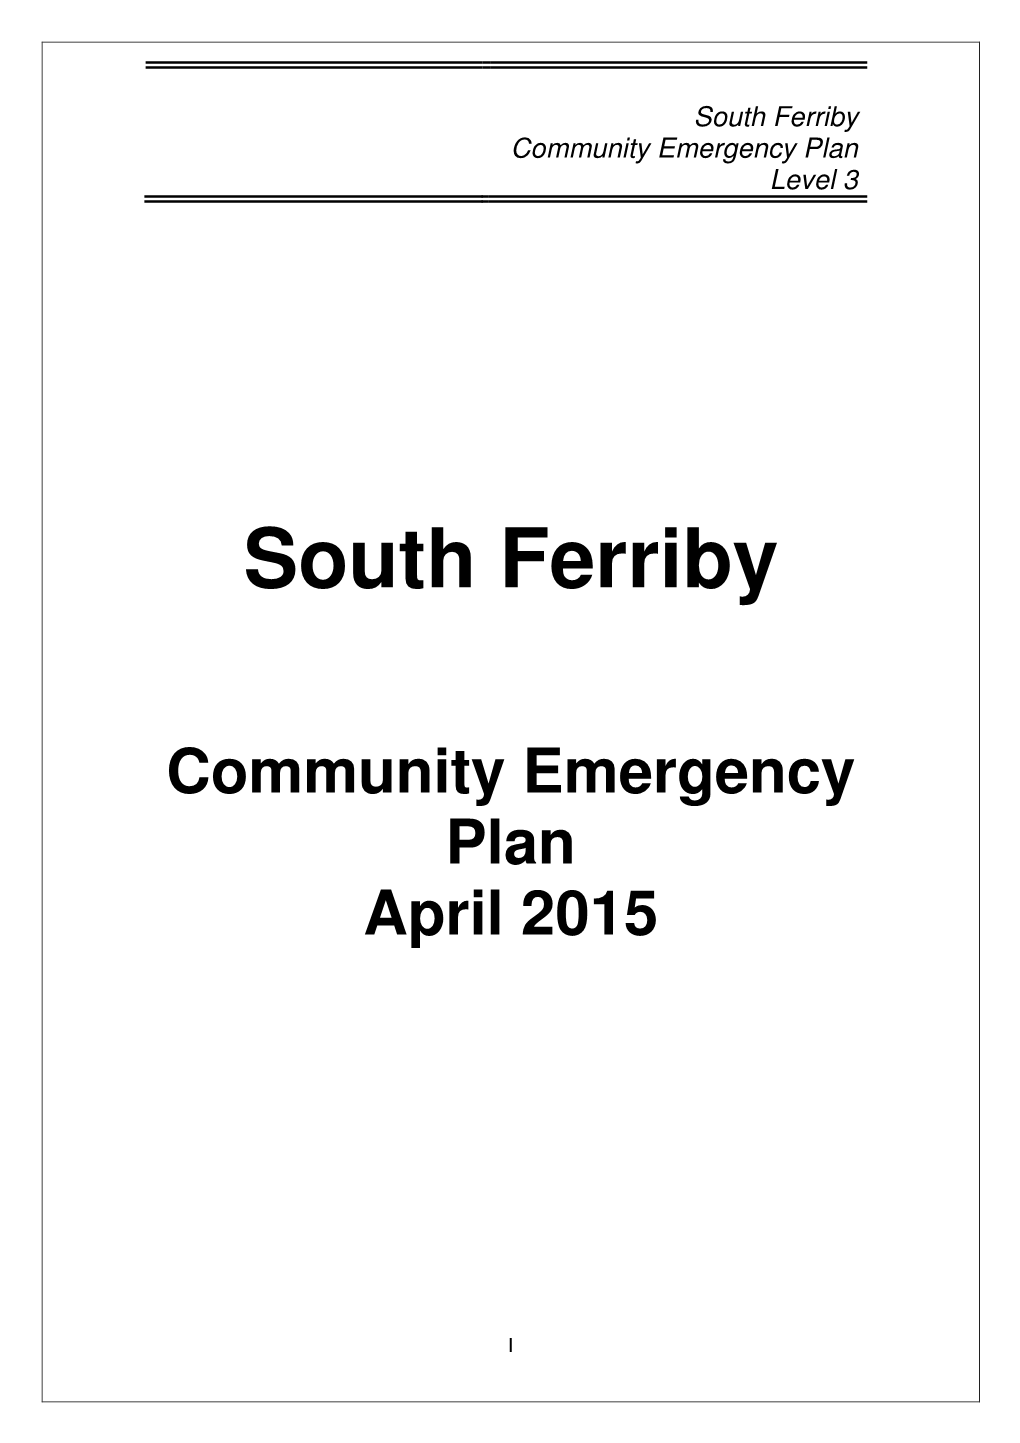 South Ferriby Parish Council • Kate Smith, South Ferriby Post Office • the Original Electronic Version of This Plan Is Kept With